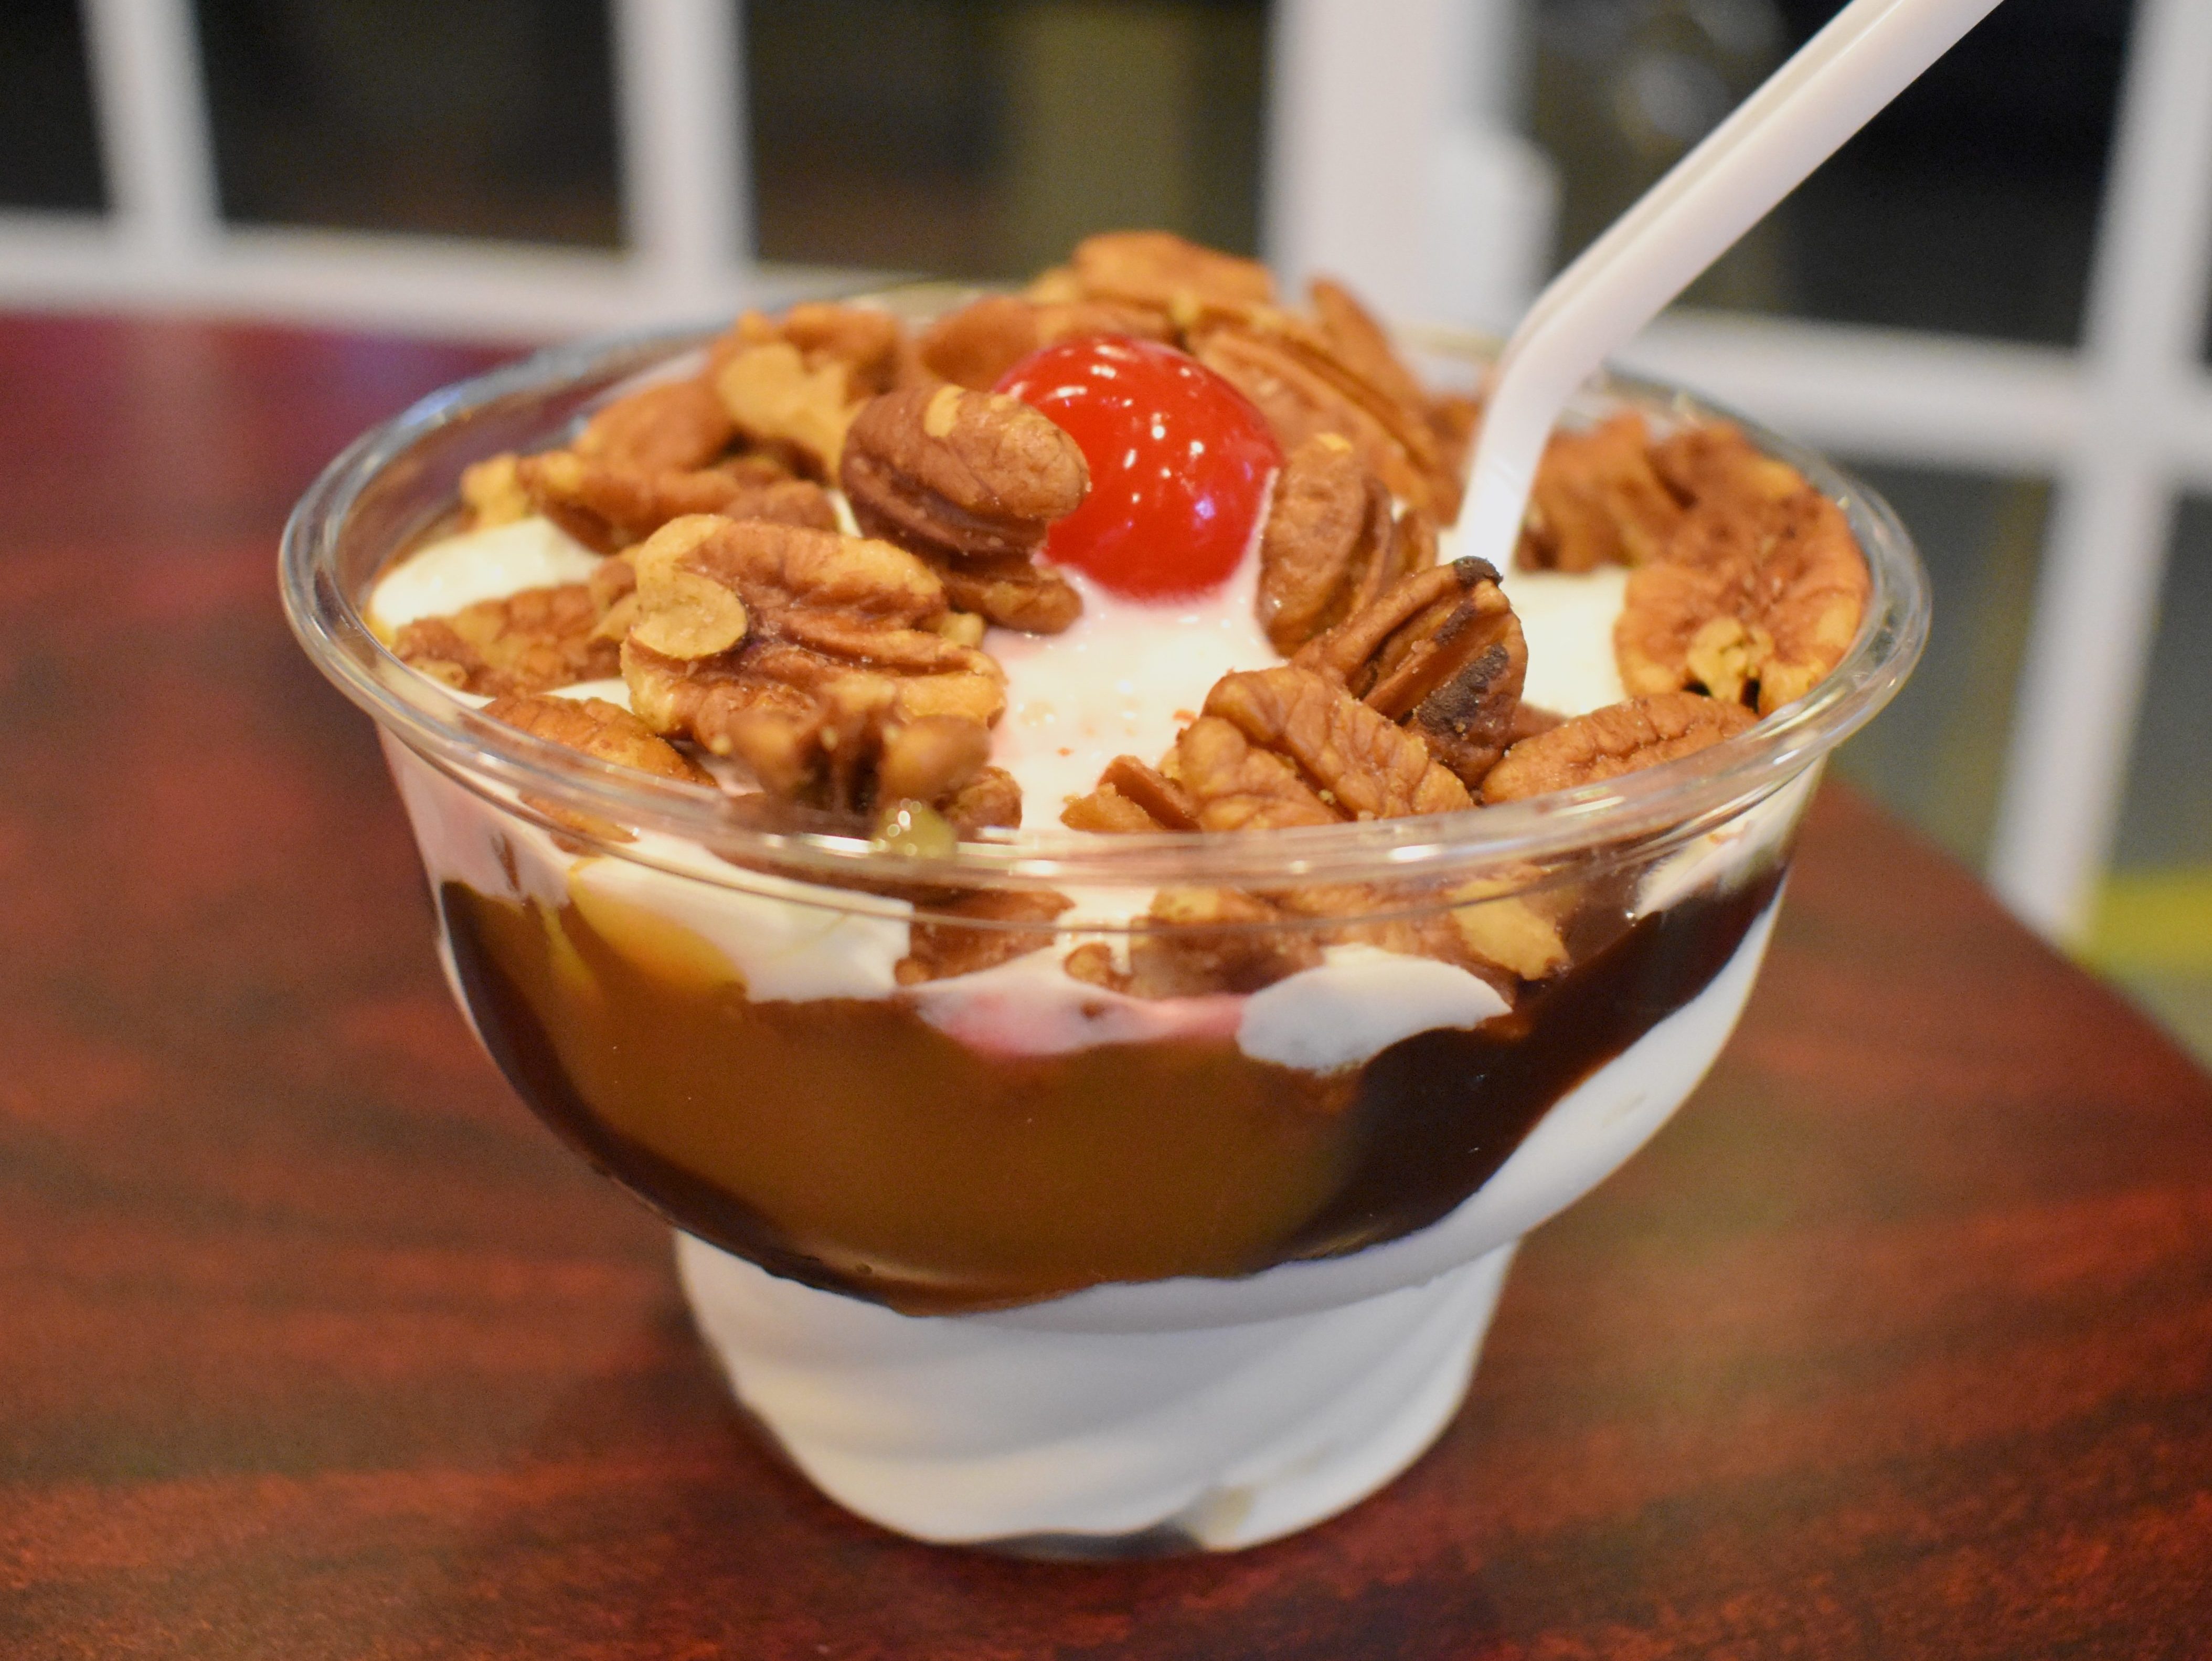 In a clear plastic cup, ice cream is topped with swirls of hot fudge and caramel, pecan halves, and a maraschino cherry